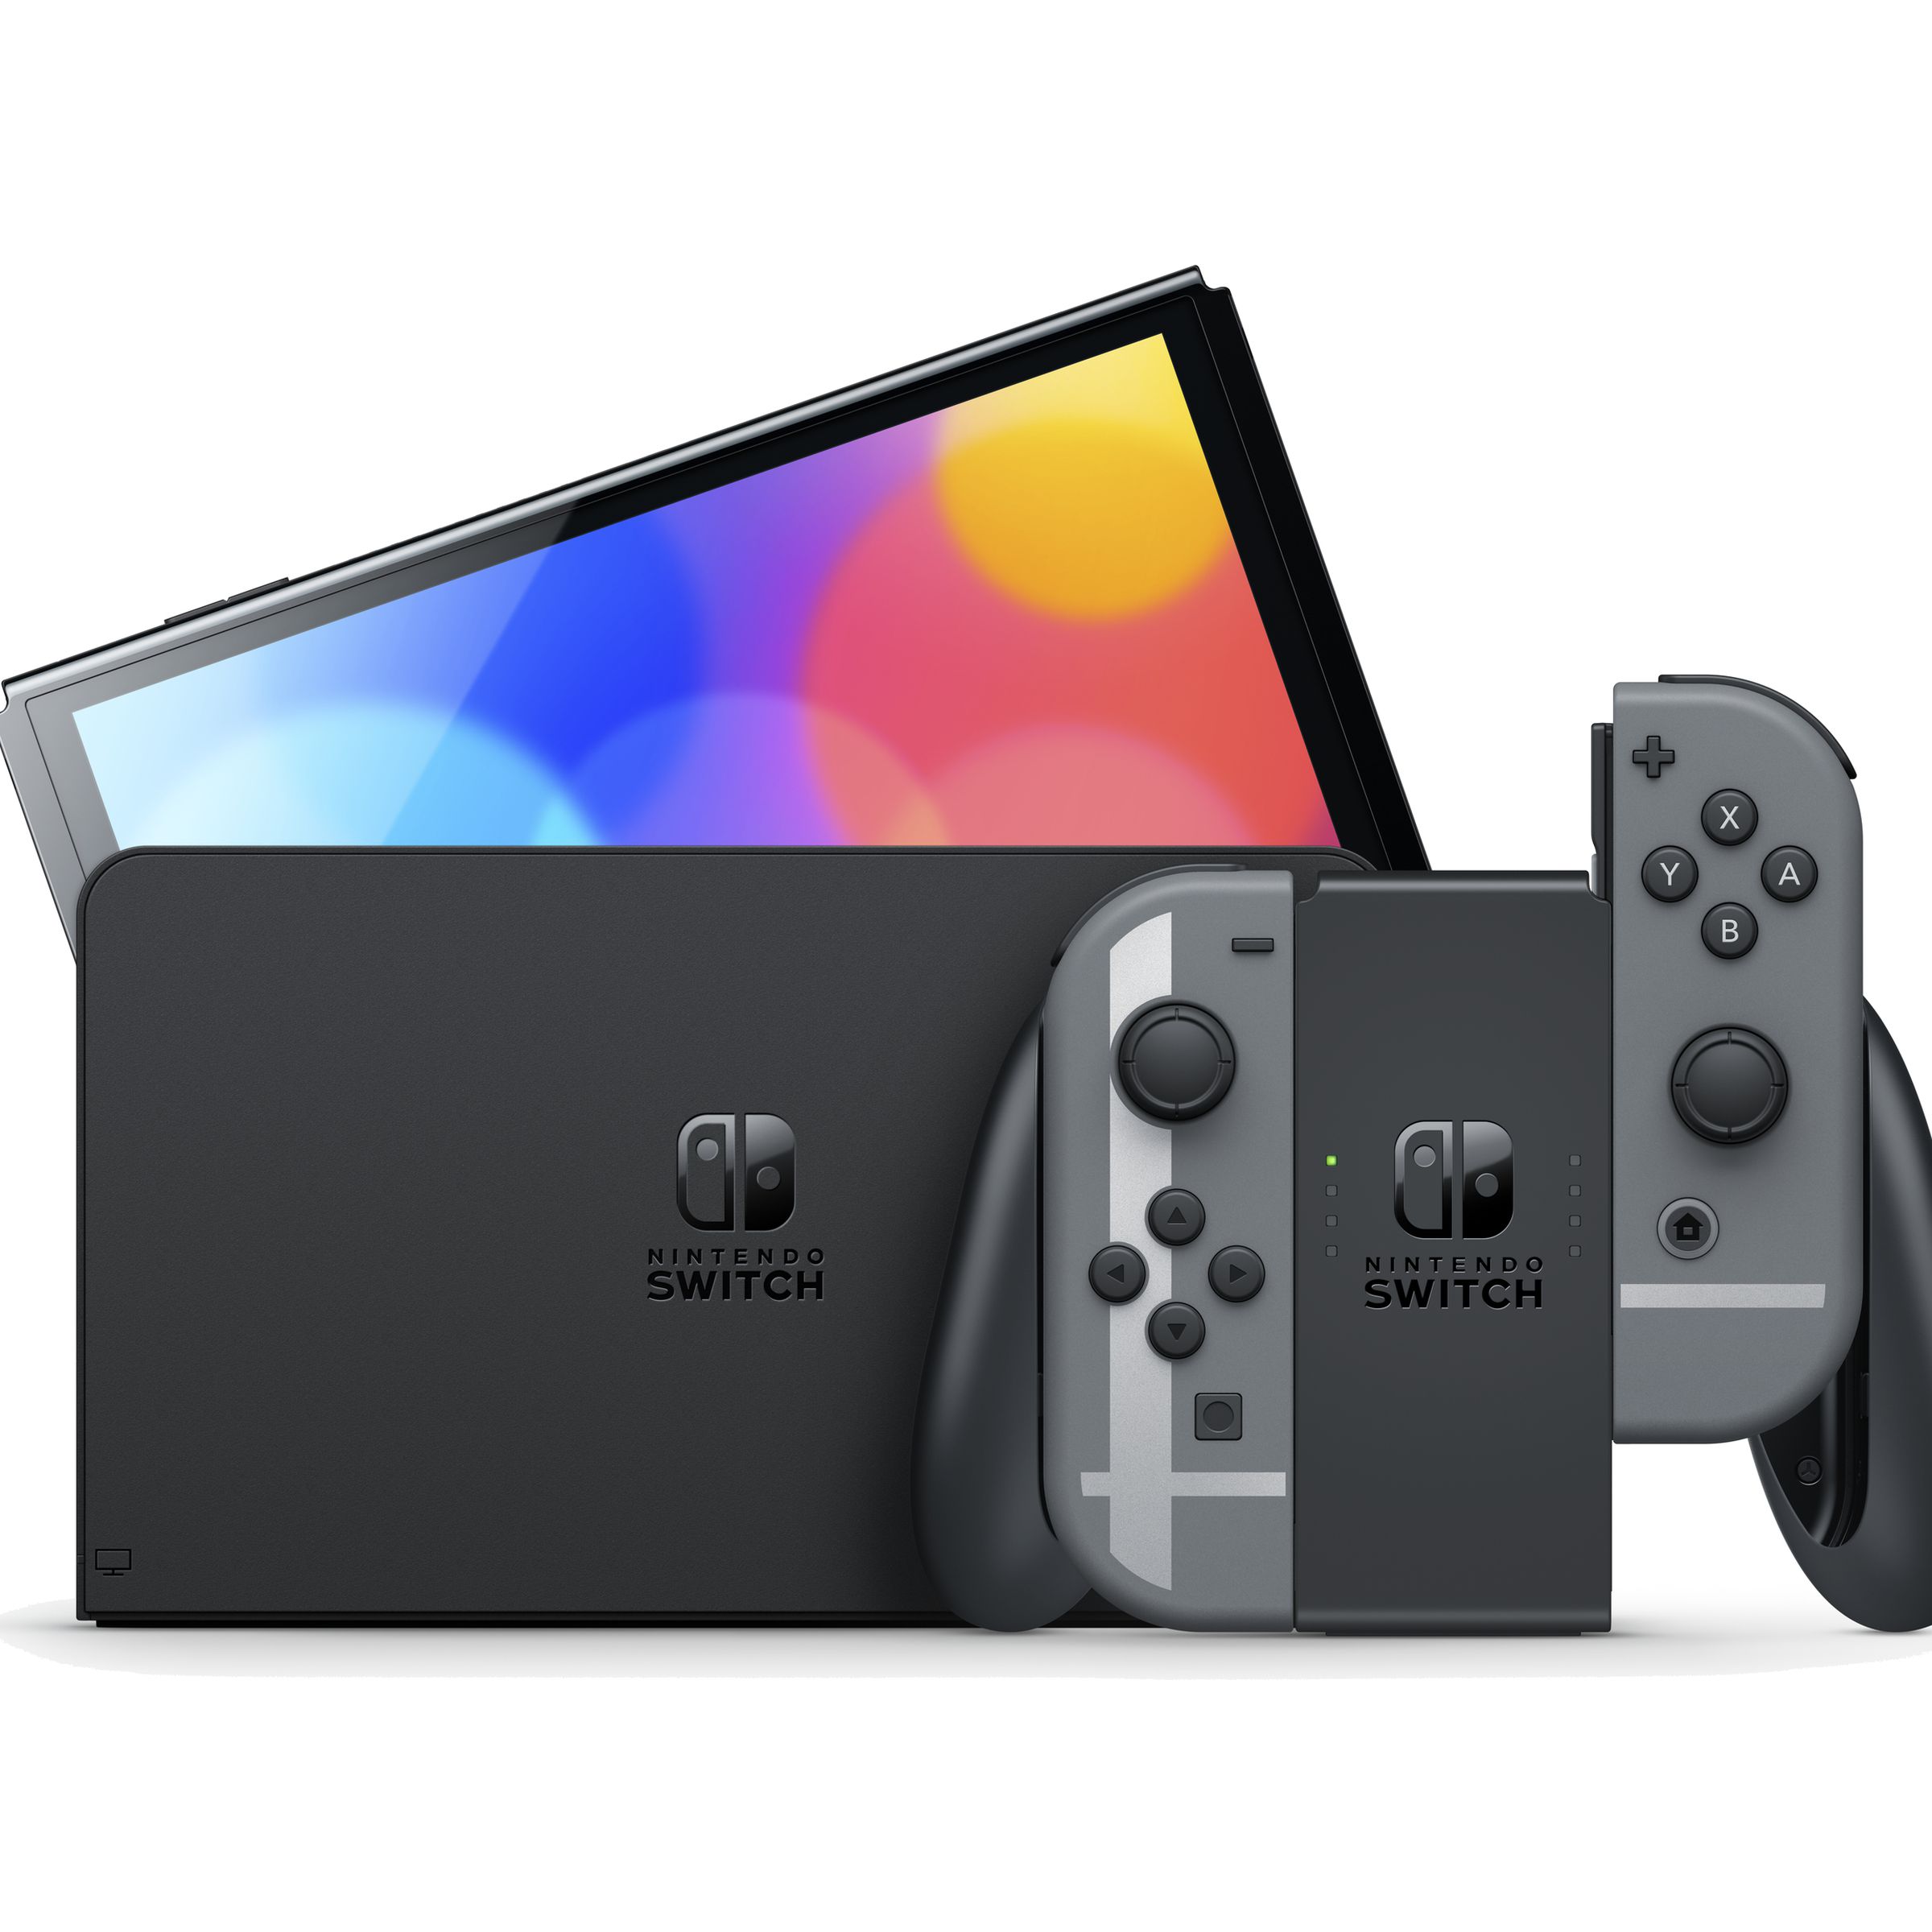 An image of a OLED Nintendo Switch with Smash Bros.-themed controllers